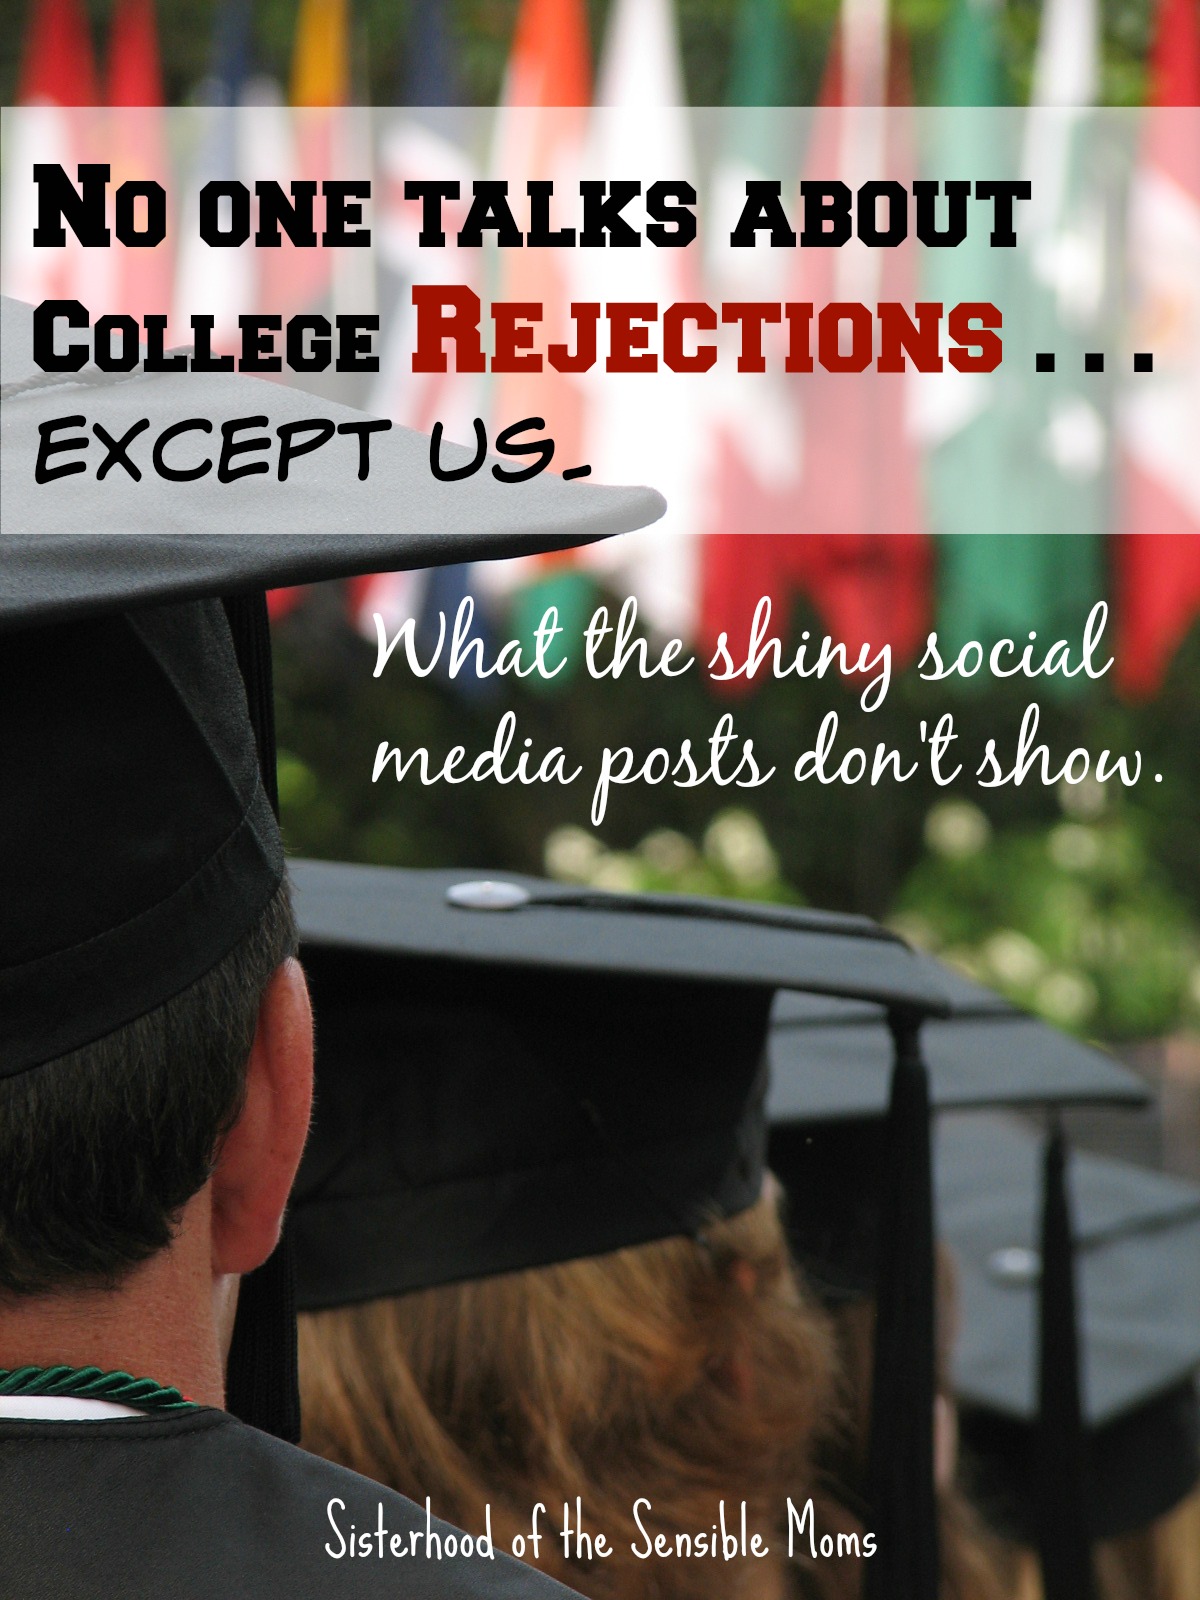 No One Talks About College Rejections . . . except us. College rejections don't make it into the shiny Facebook updates. We're here to truthfully and realistically commiserate and let you know you're not alone. | Teens | Parenting | Sisterhood of the Sensible Moms